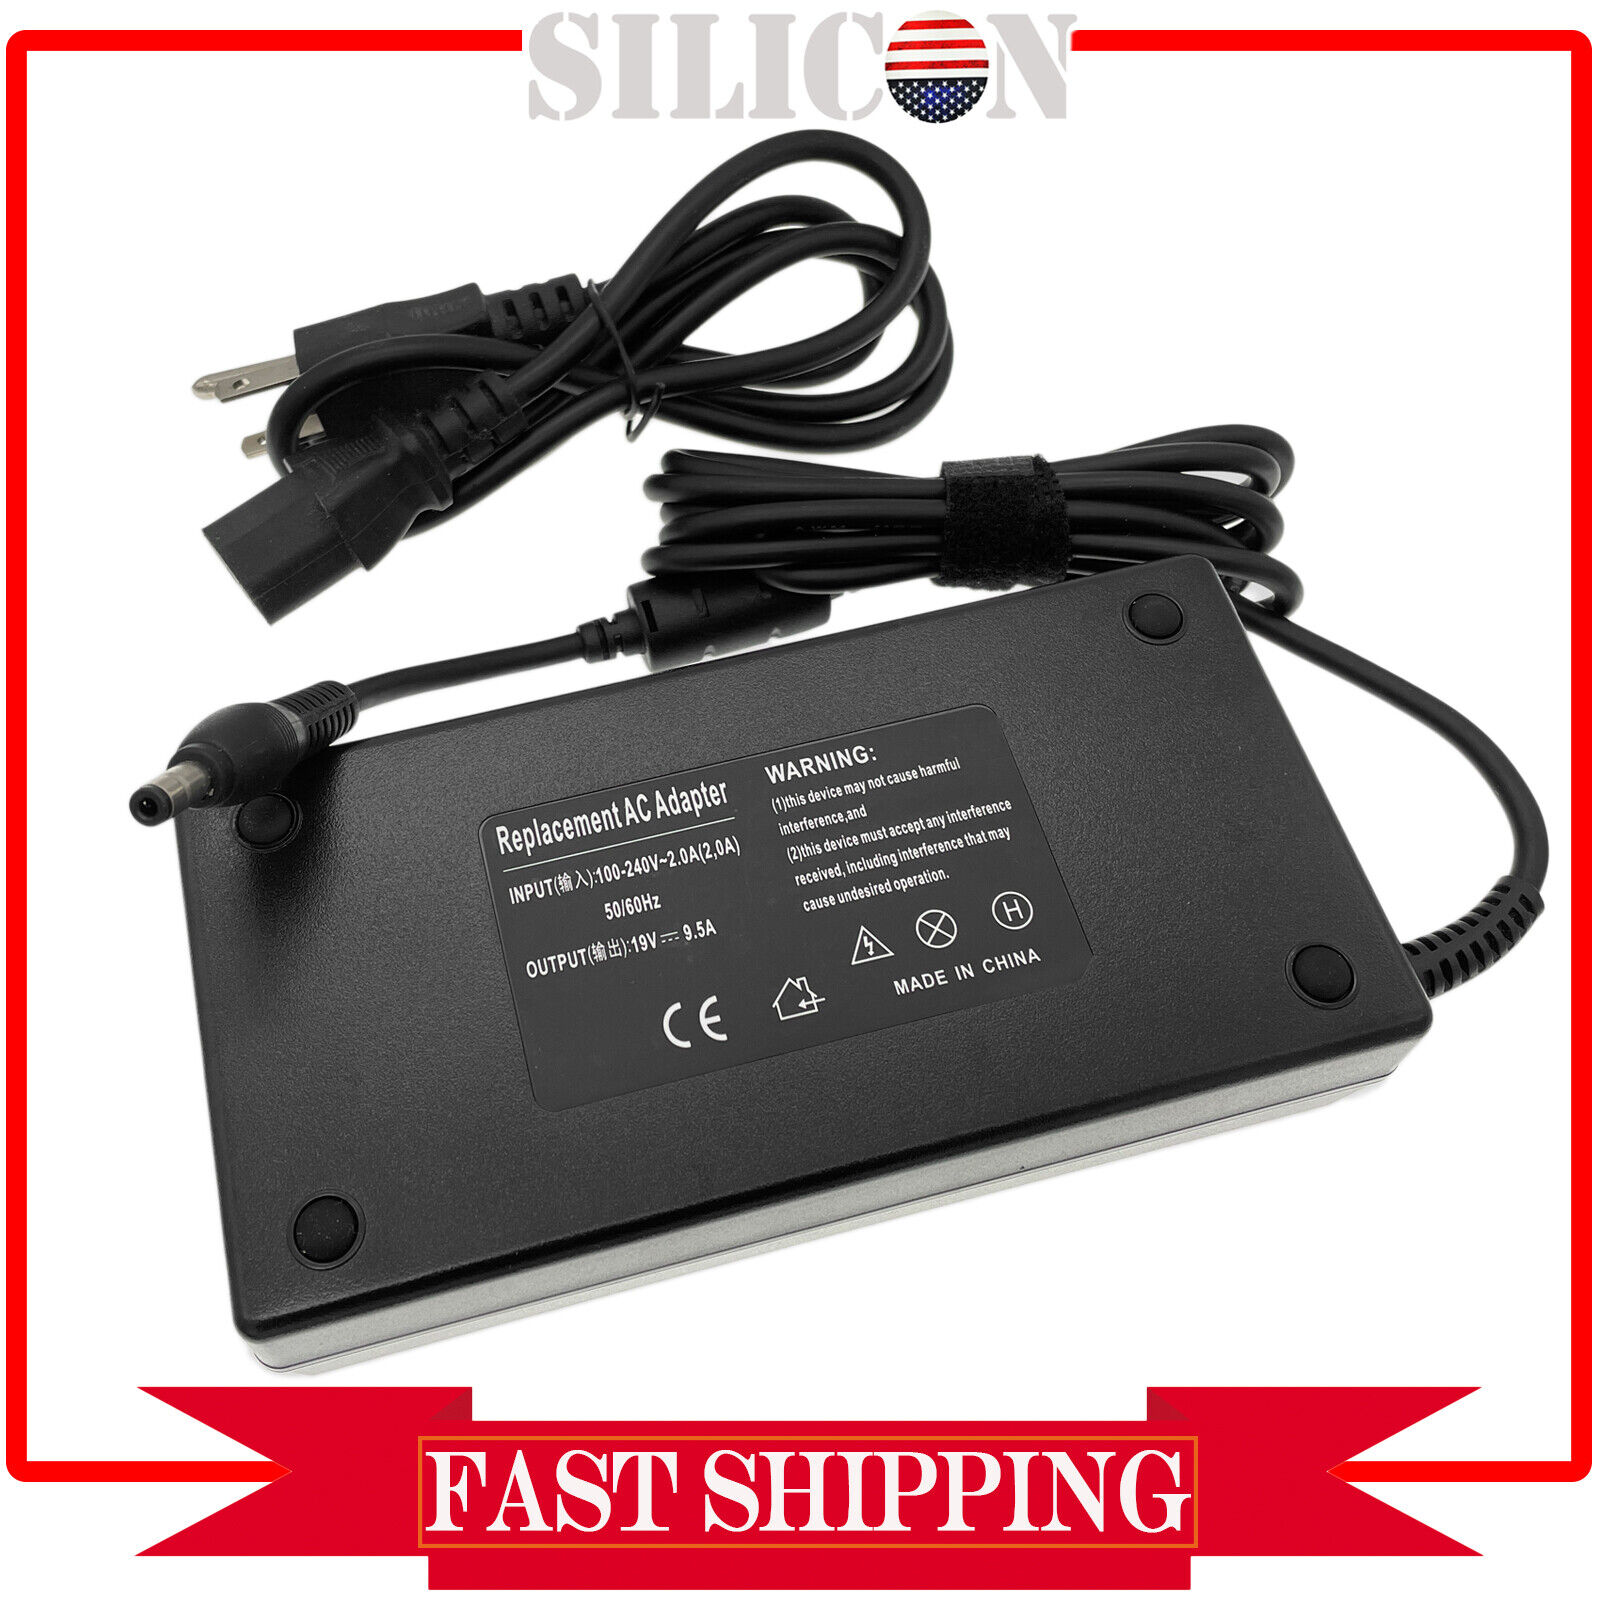 AC Adapter for Cyberpower PC Tracer III 15 15V Slim Xtreme VR100 VR300 VR500